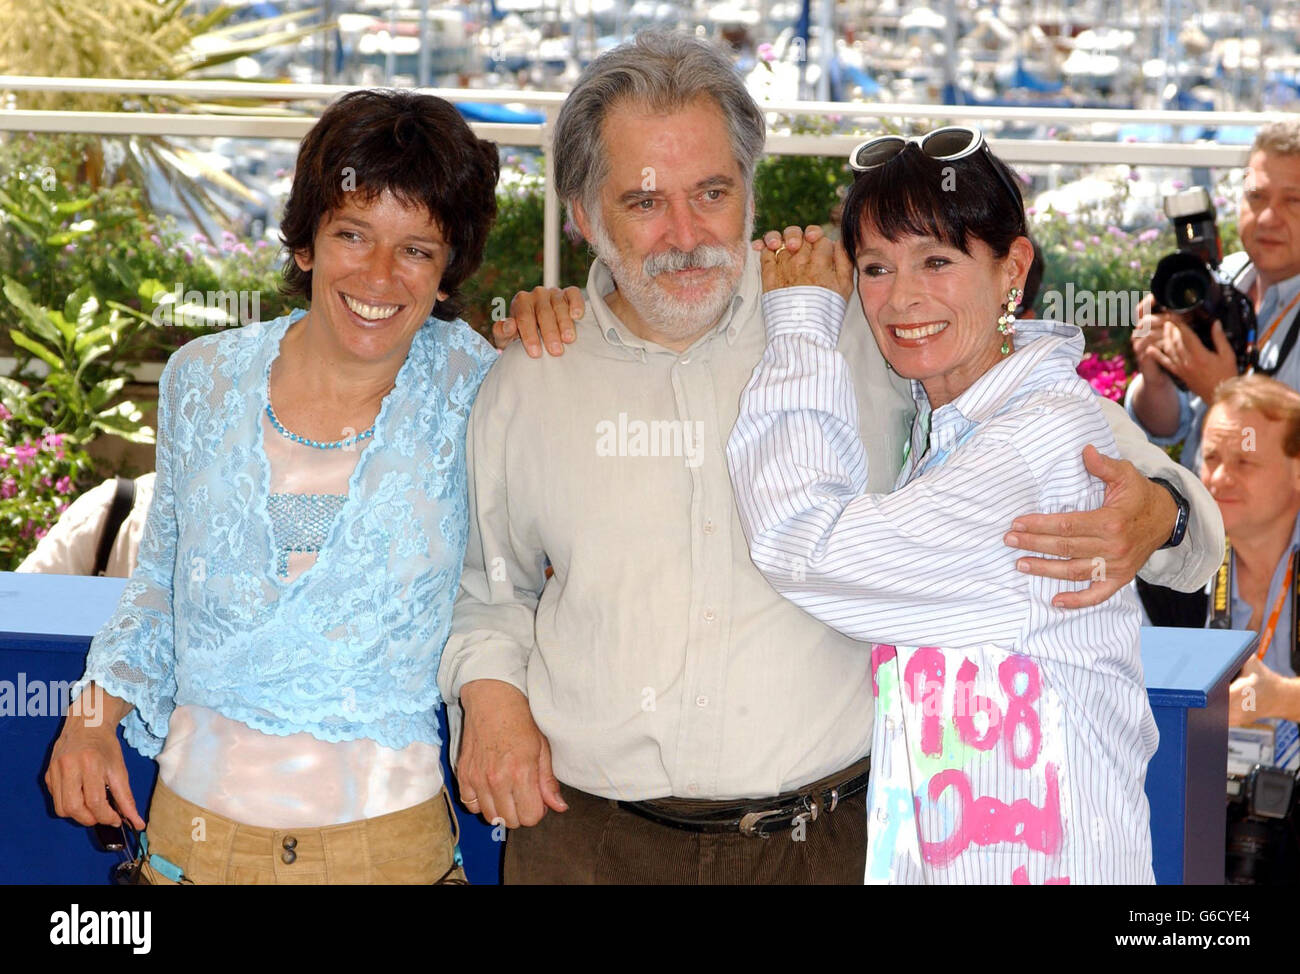 Annie, Michael and Geraldine Chaplin (left-right) at a photocall in Cannes, France to promote the new documentary about their father Charlie Chaplin. Stock Photo